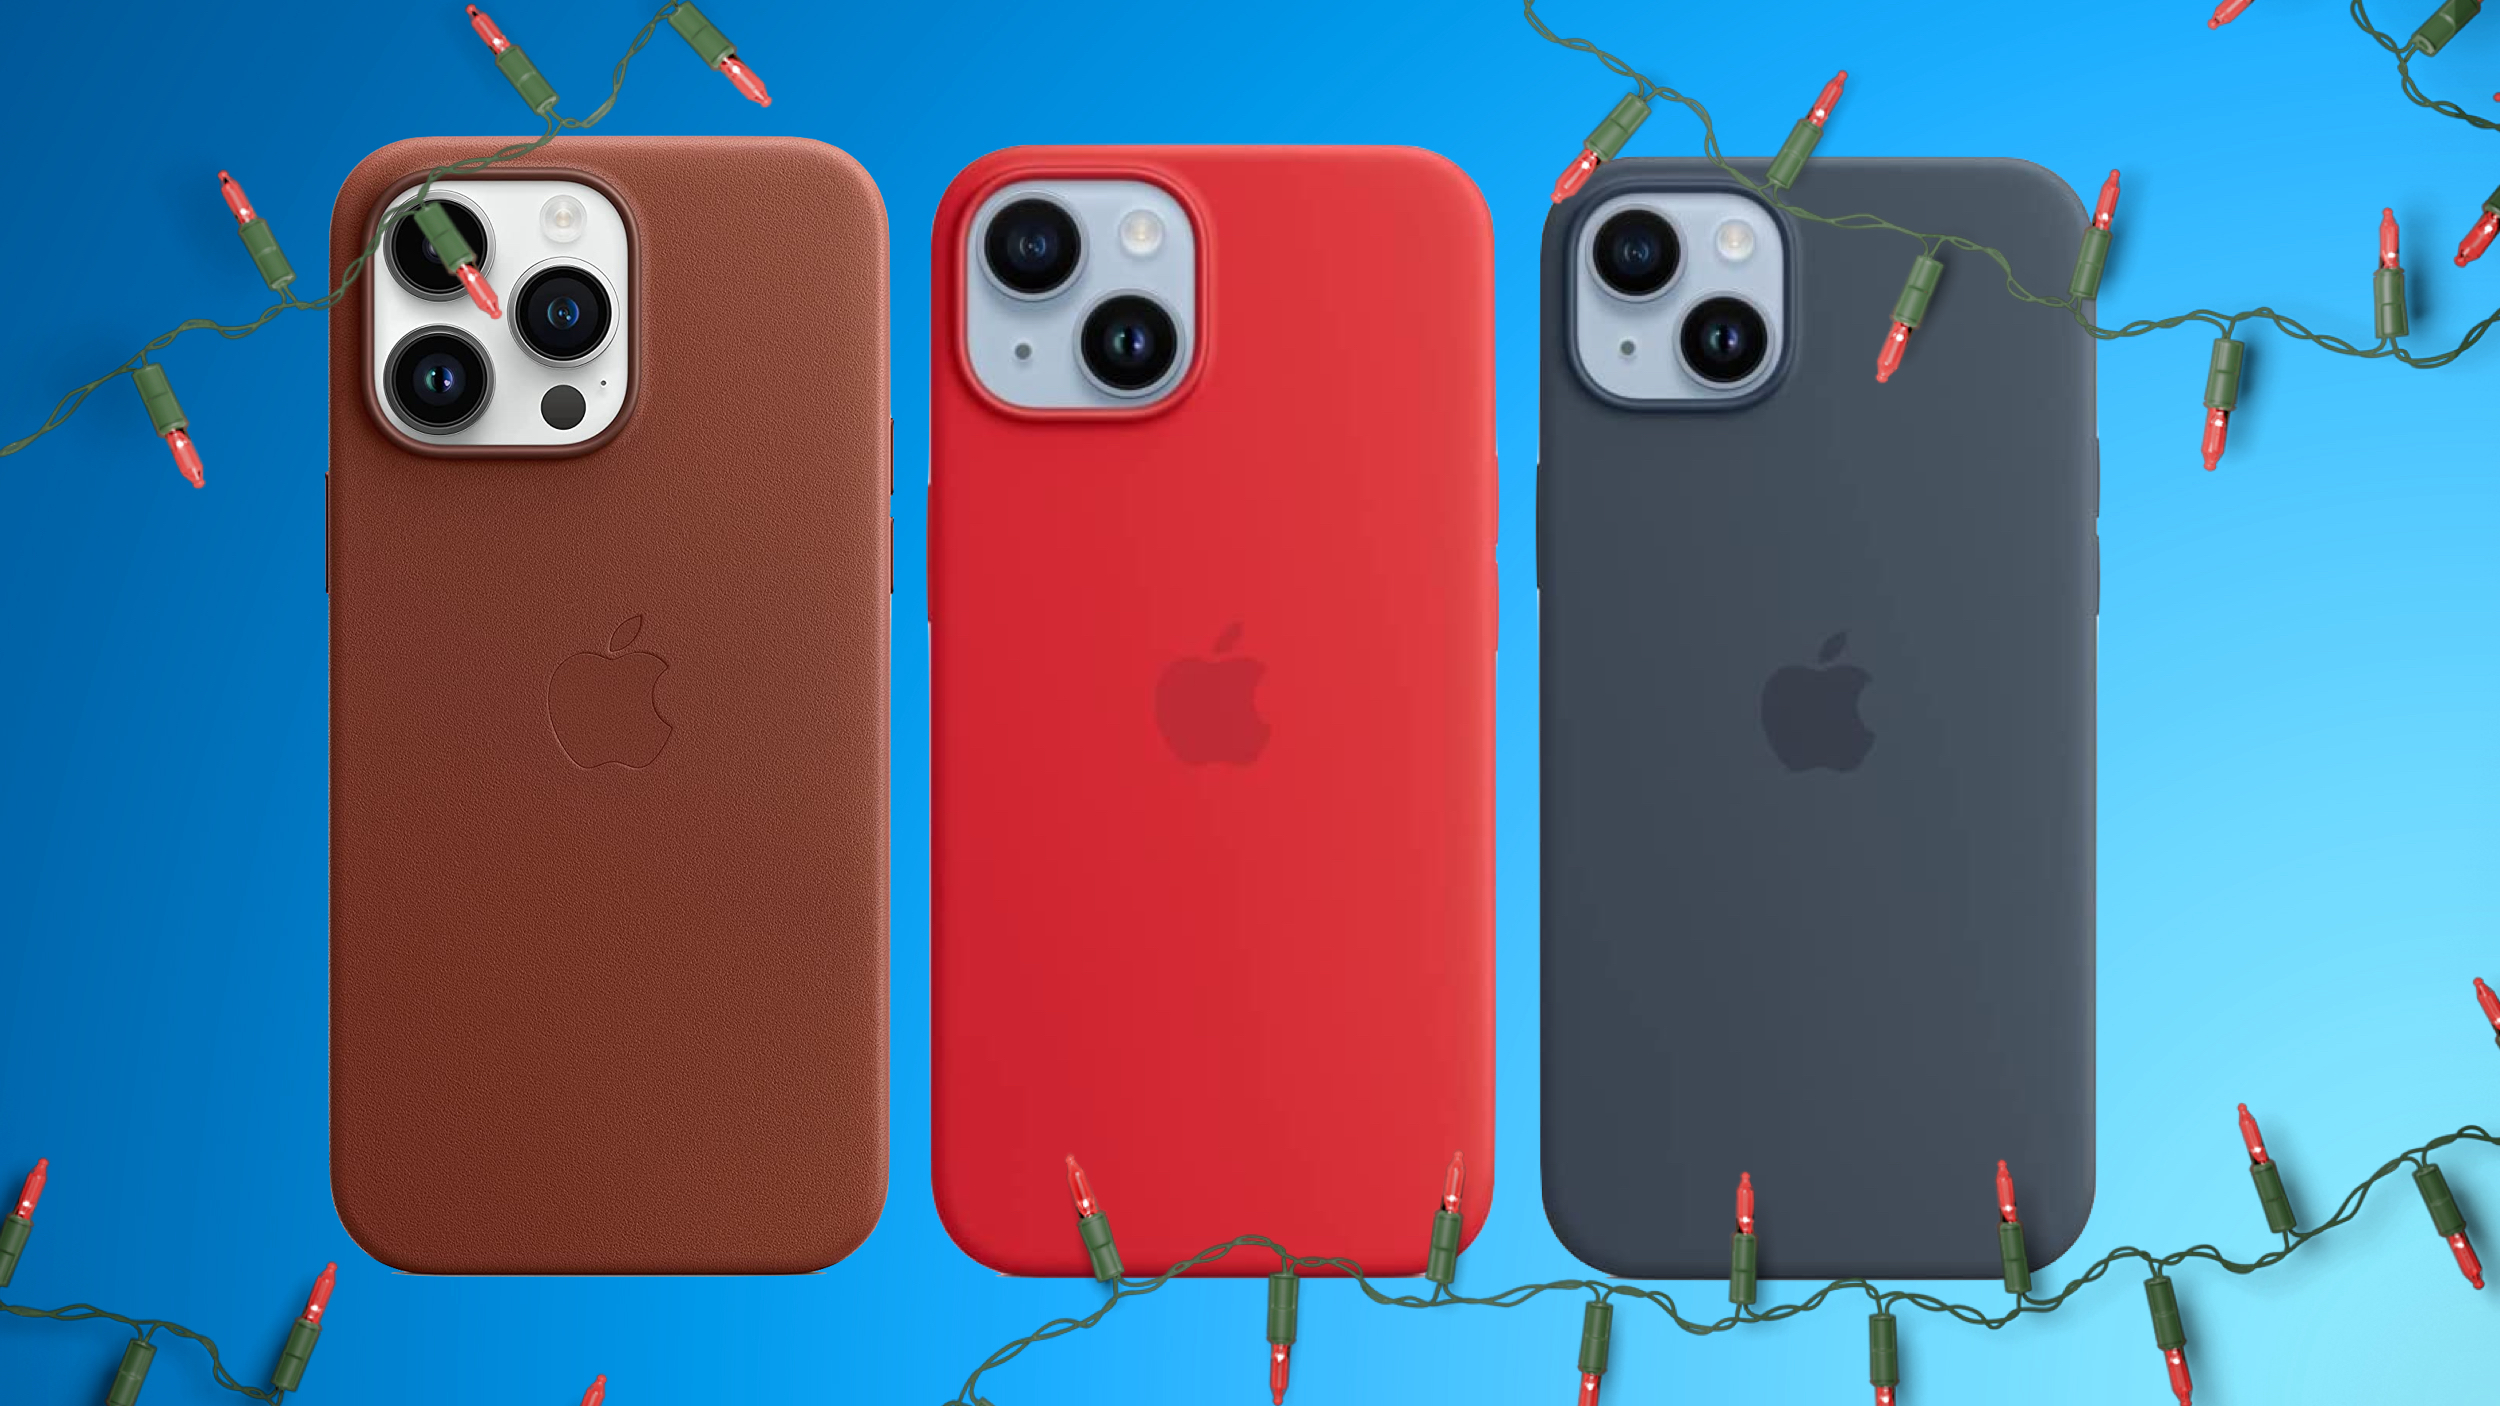 Shop Deals on Cases and Accessories for Your New iPhone 14, iPad, and More